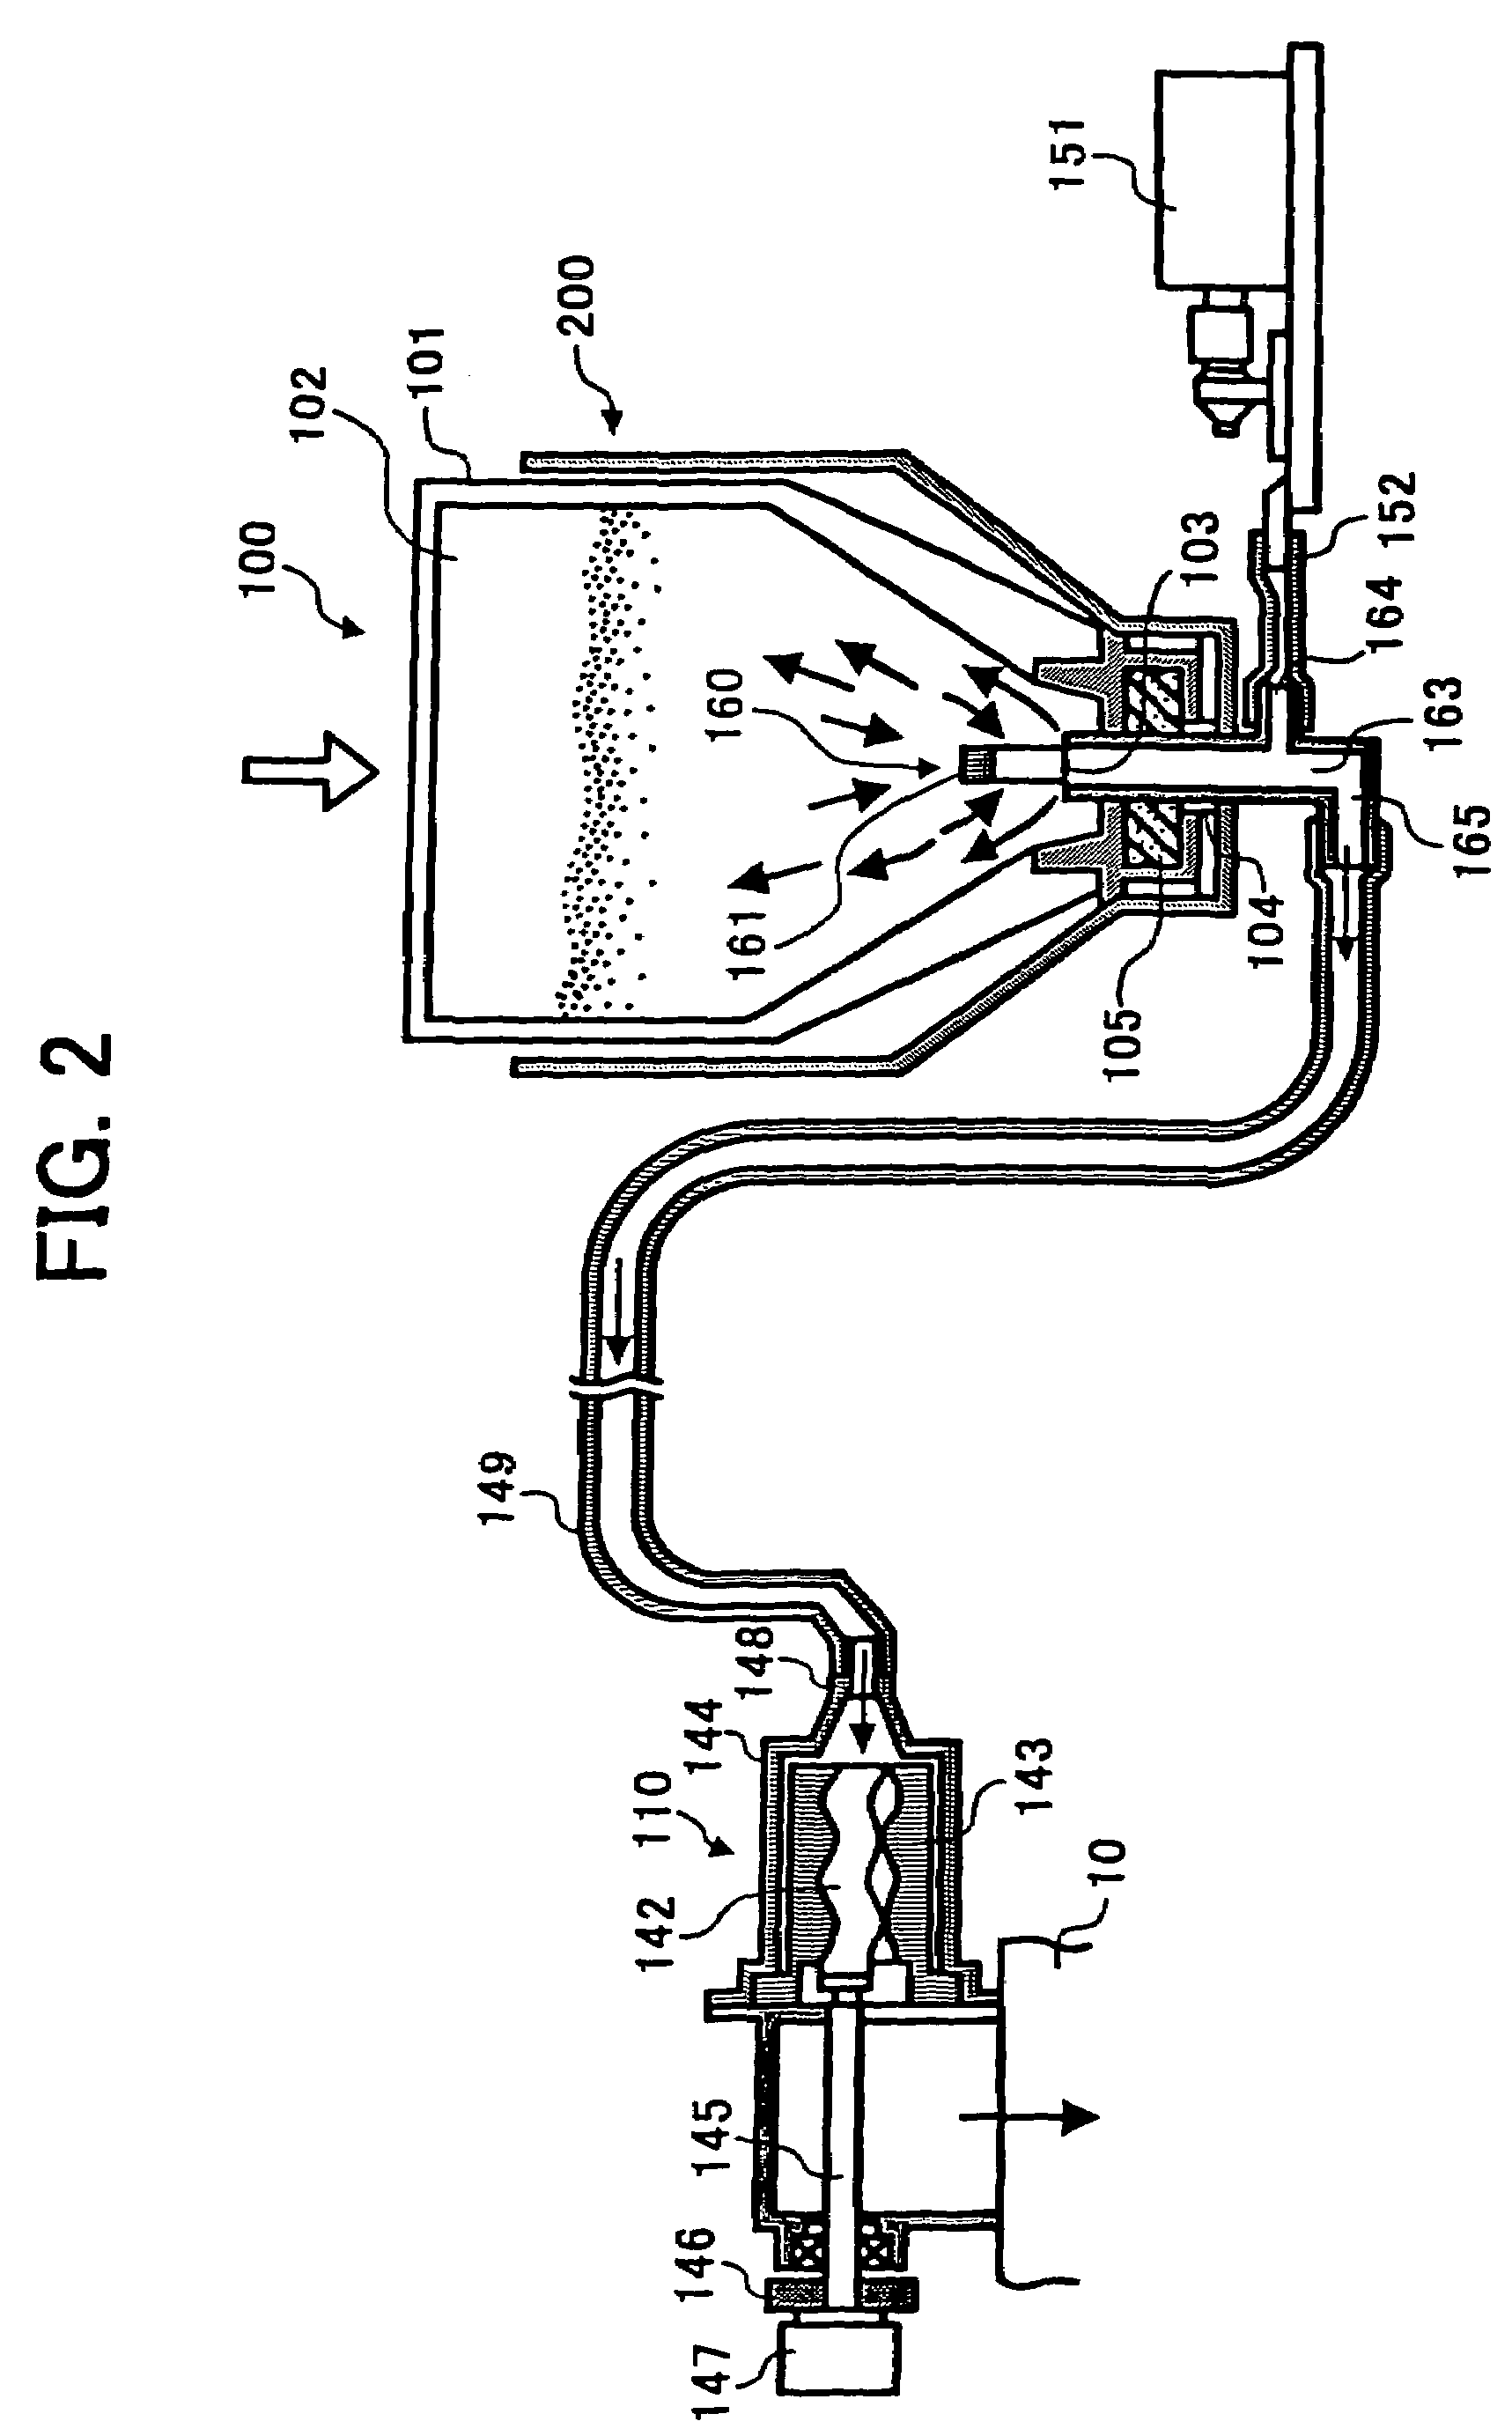 Apparatus and method for replenishing a developing device with toner while suppressing toner remaining